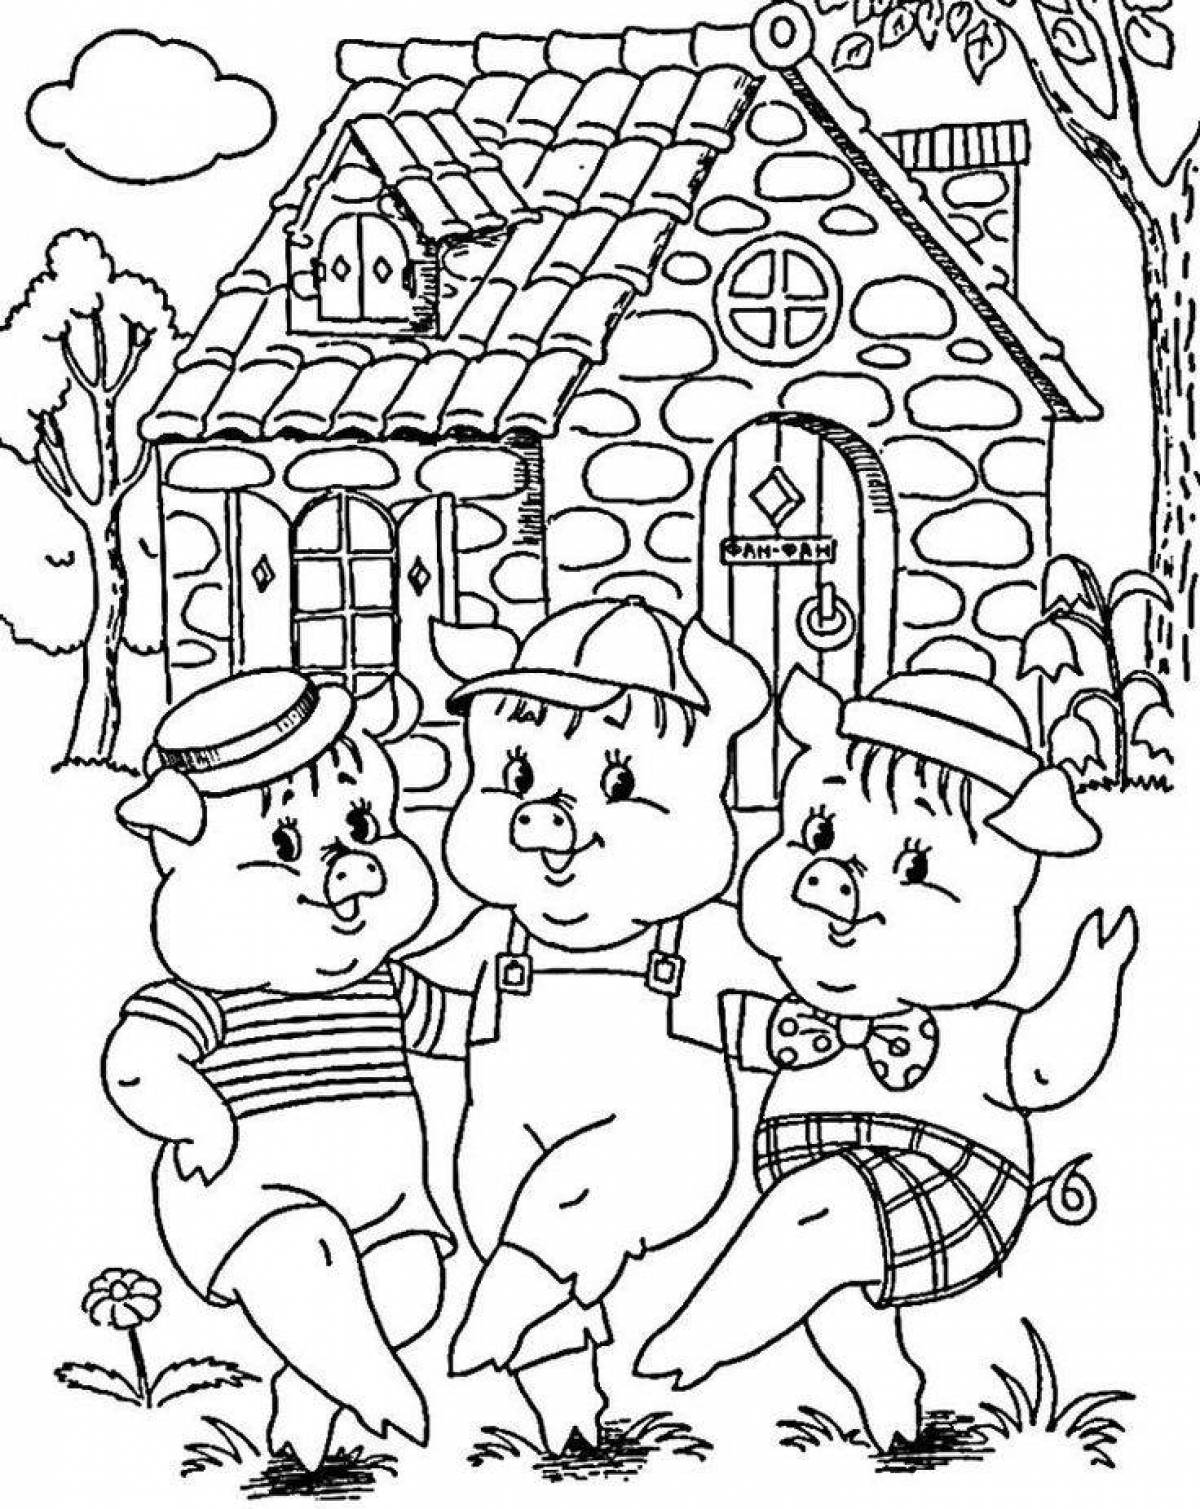 Intriguing fairy tale coloring book